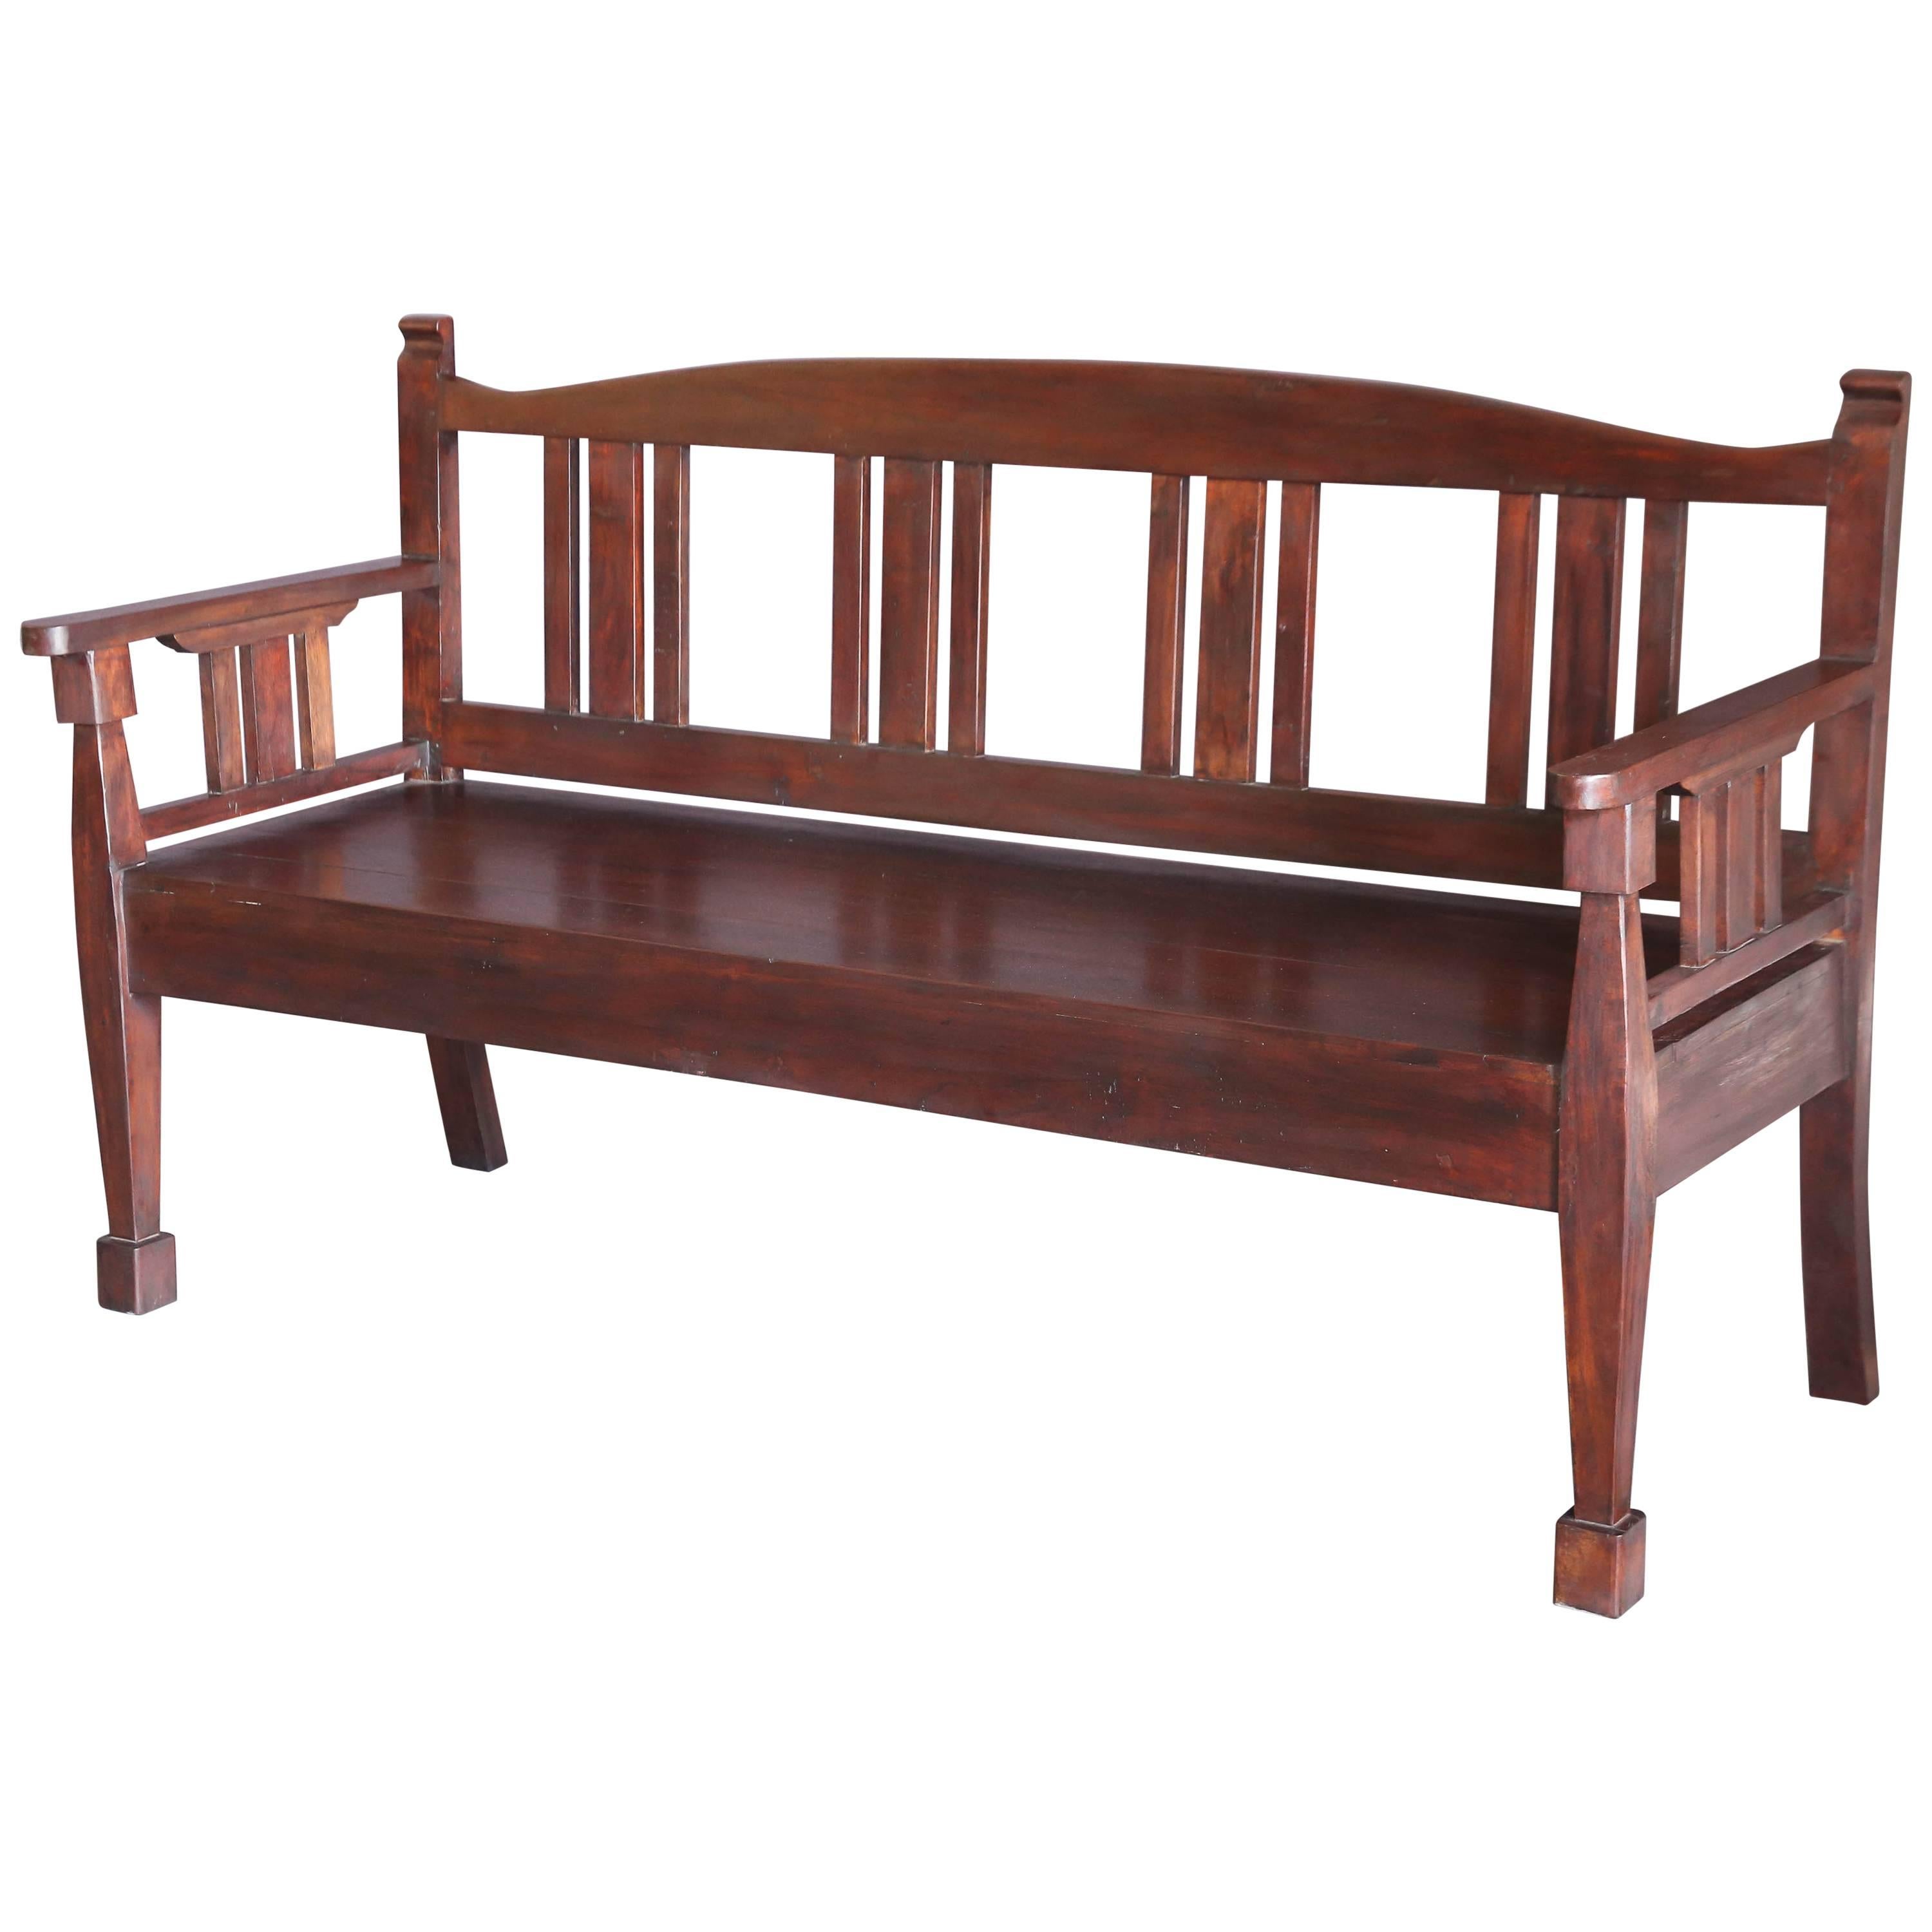 Late 19th Century Solid Teak Wood Typical Tea Plantation Bench from Darjeeling For Sale